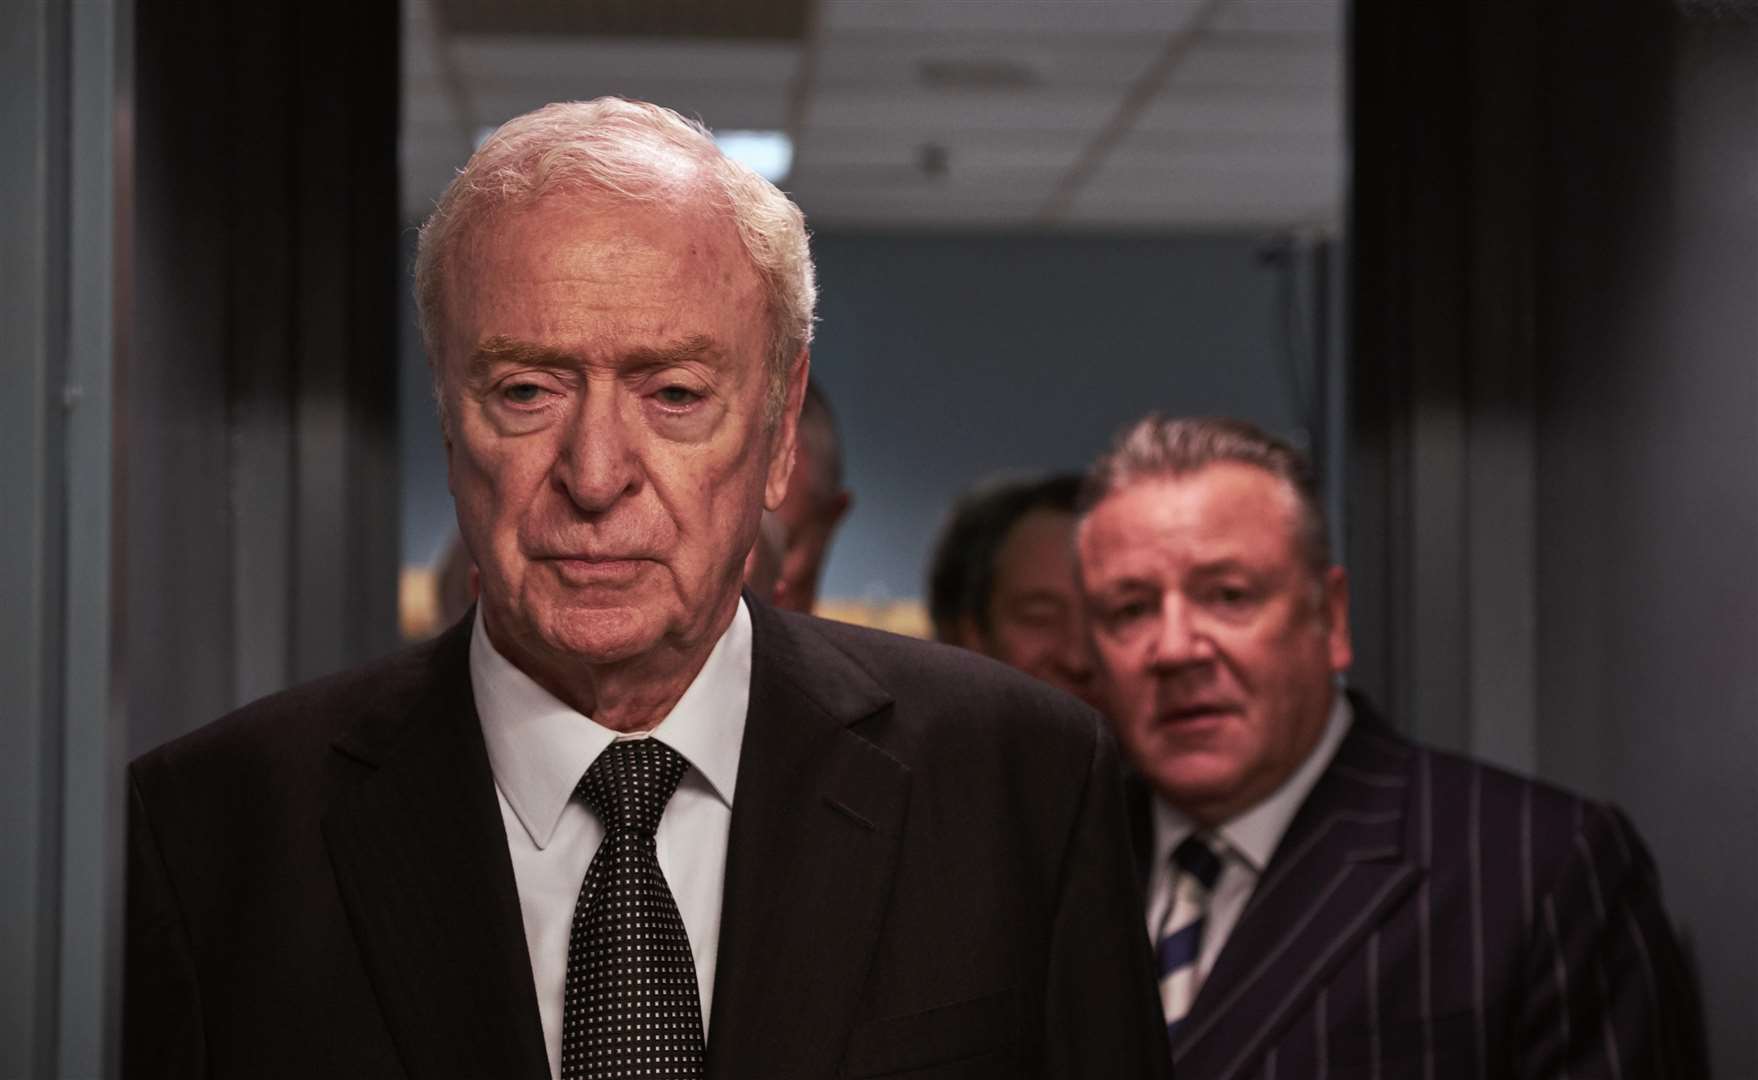 King Of Thieves. Pictured: Sir Michael Caine as Brian Reader and Ray Winstone as Danny Jones. Picture: PA Photo/StudioCanal/Jack English.